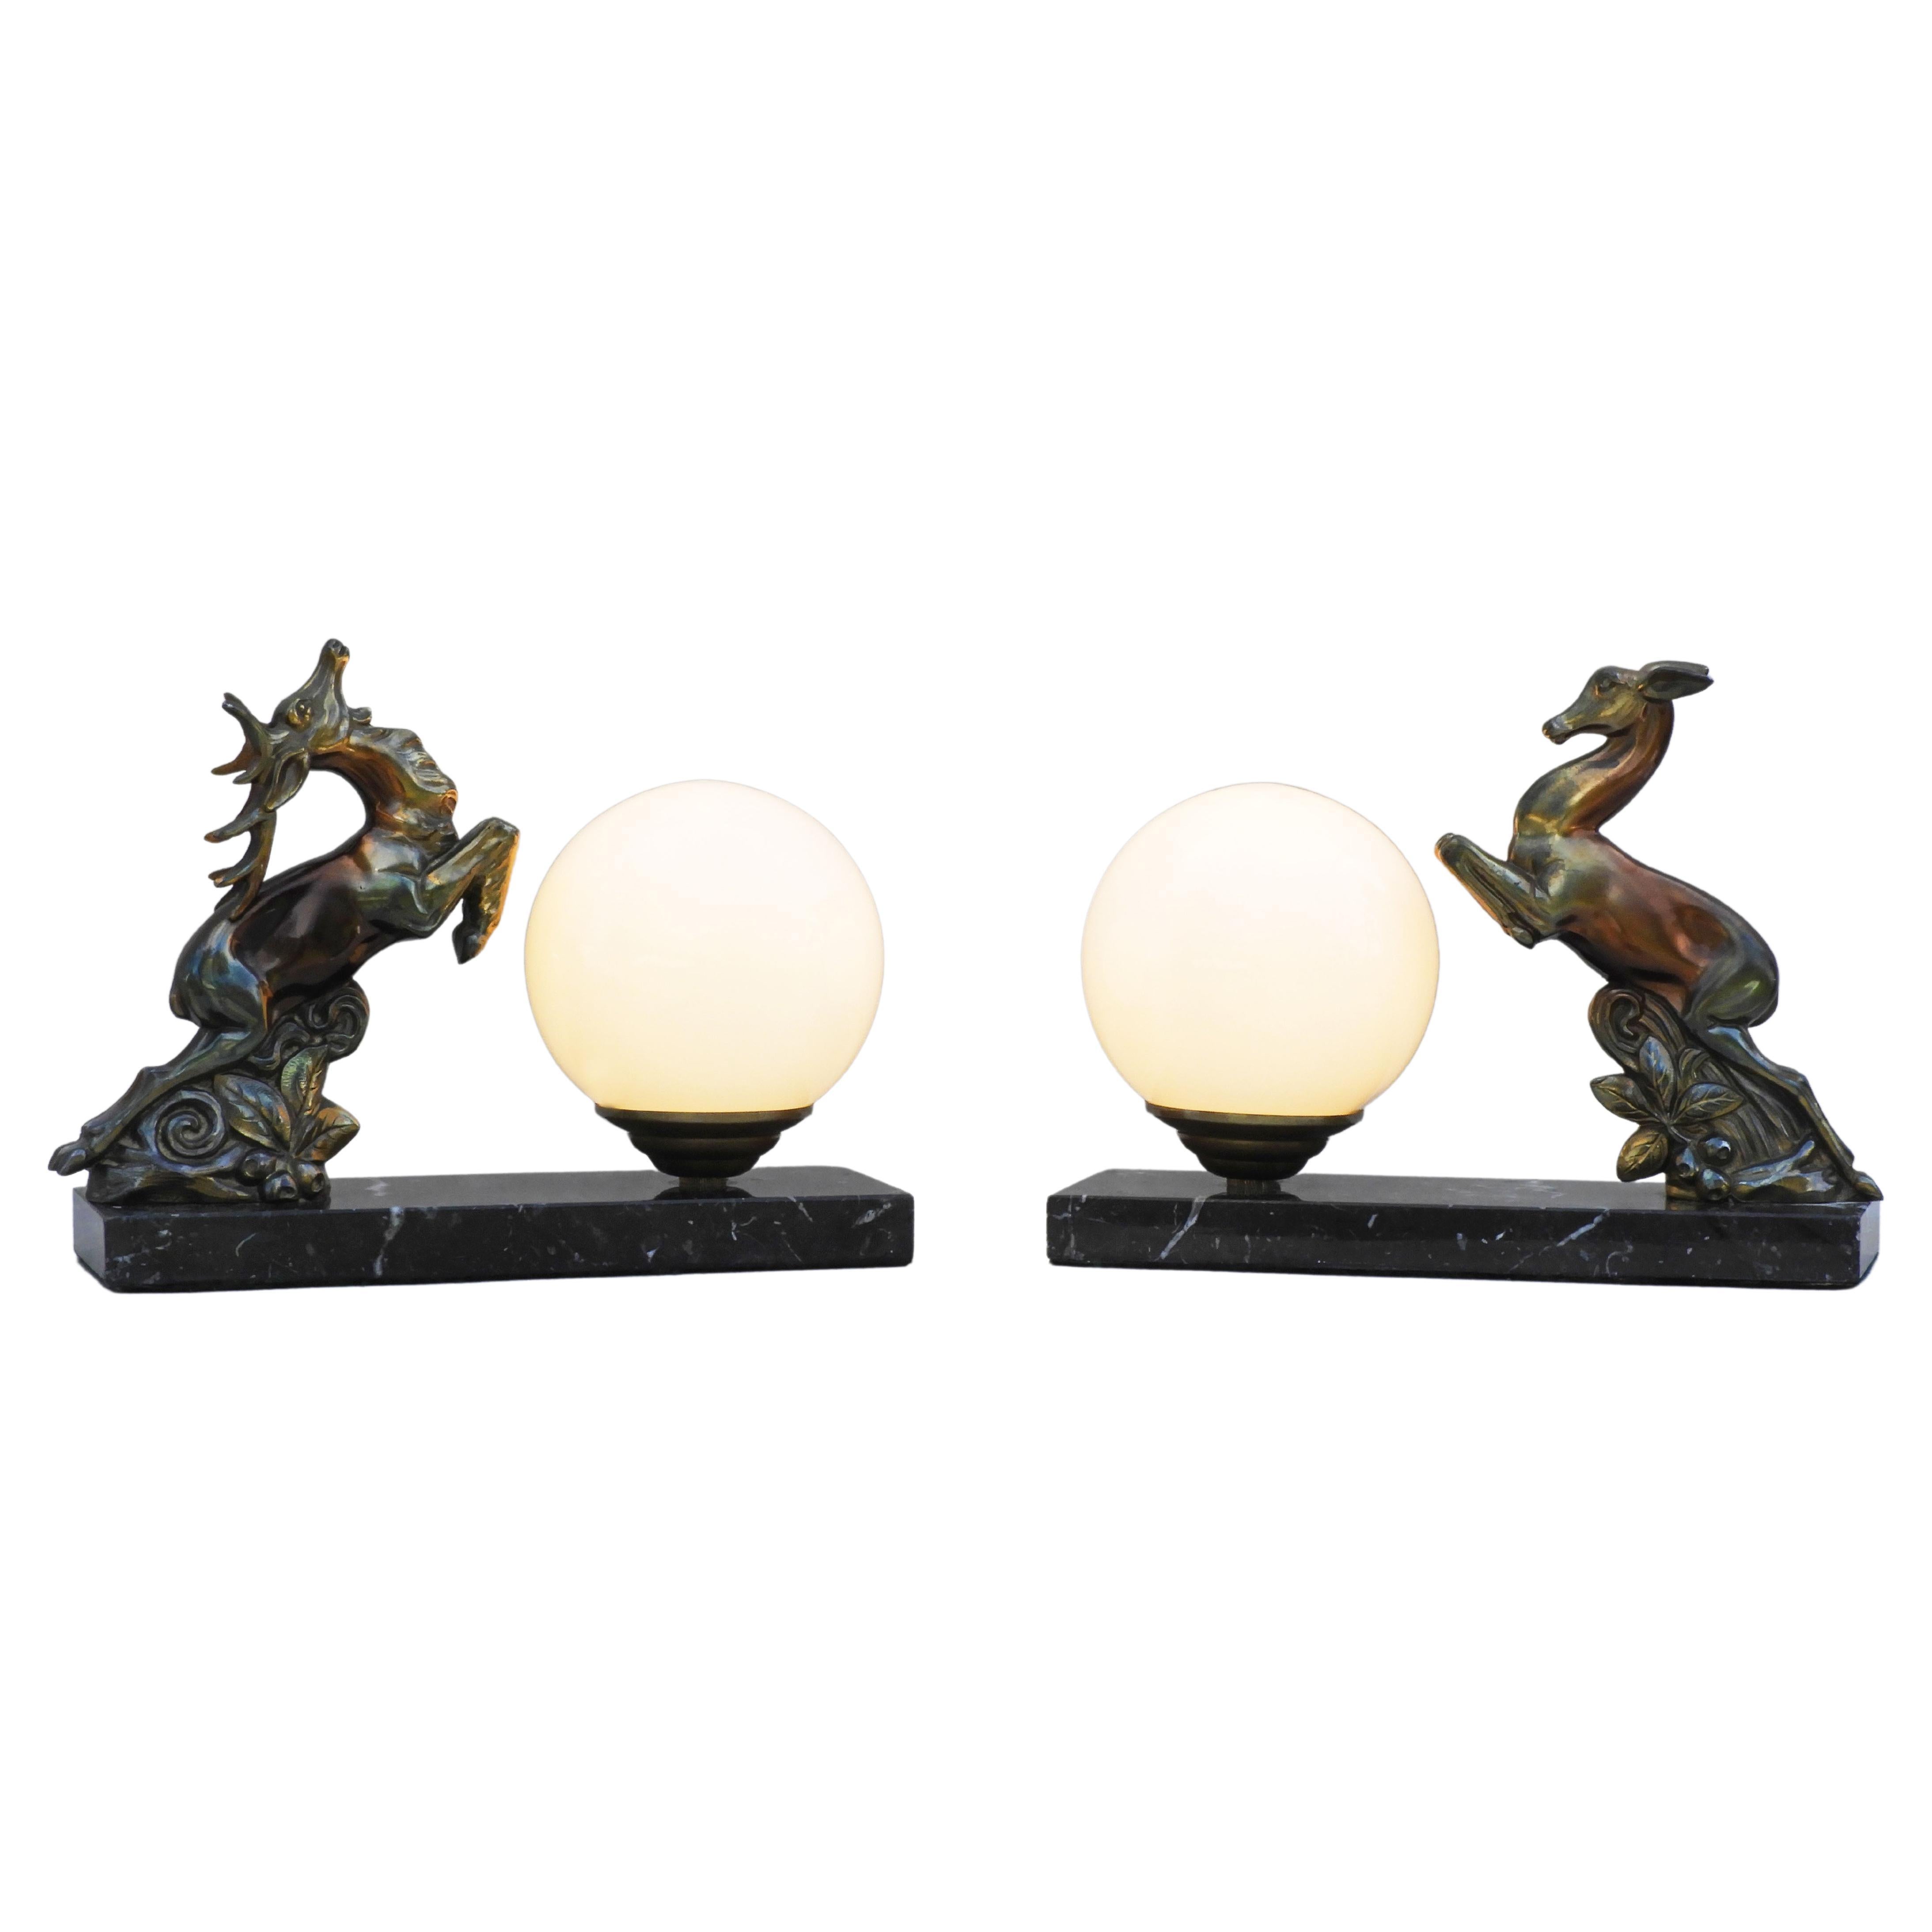 Pair of French Art Deco Deer Table Lamps or Night Light Sculptures C1930 For Sale